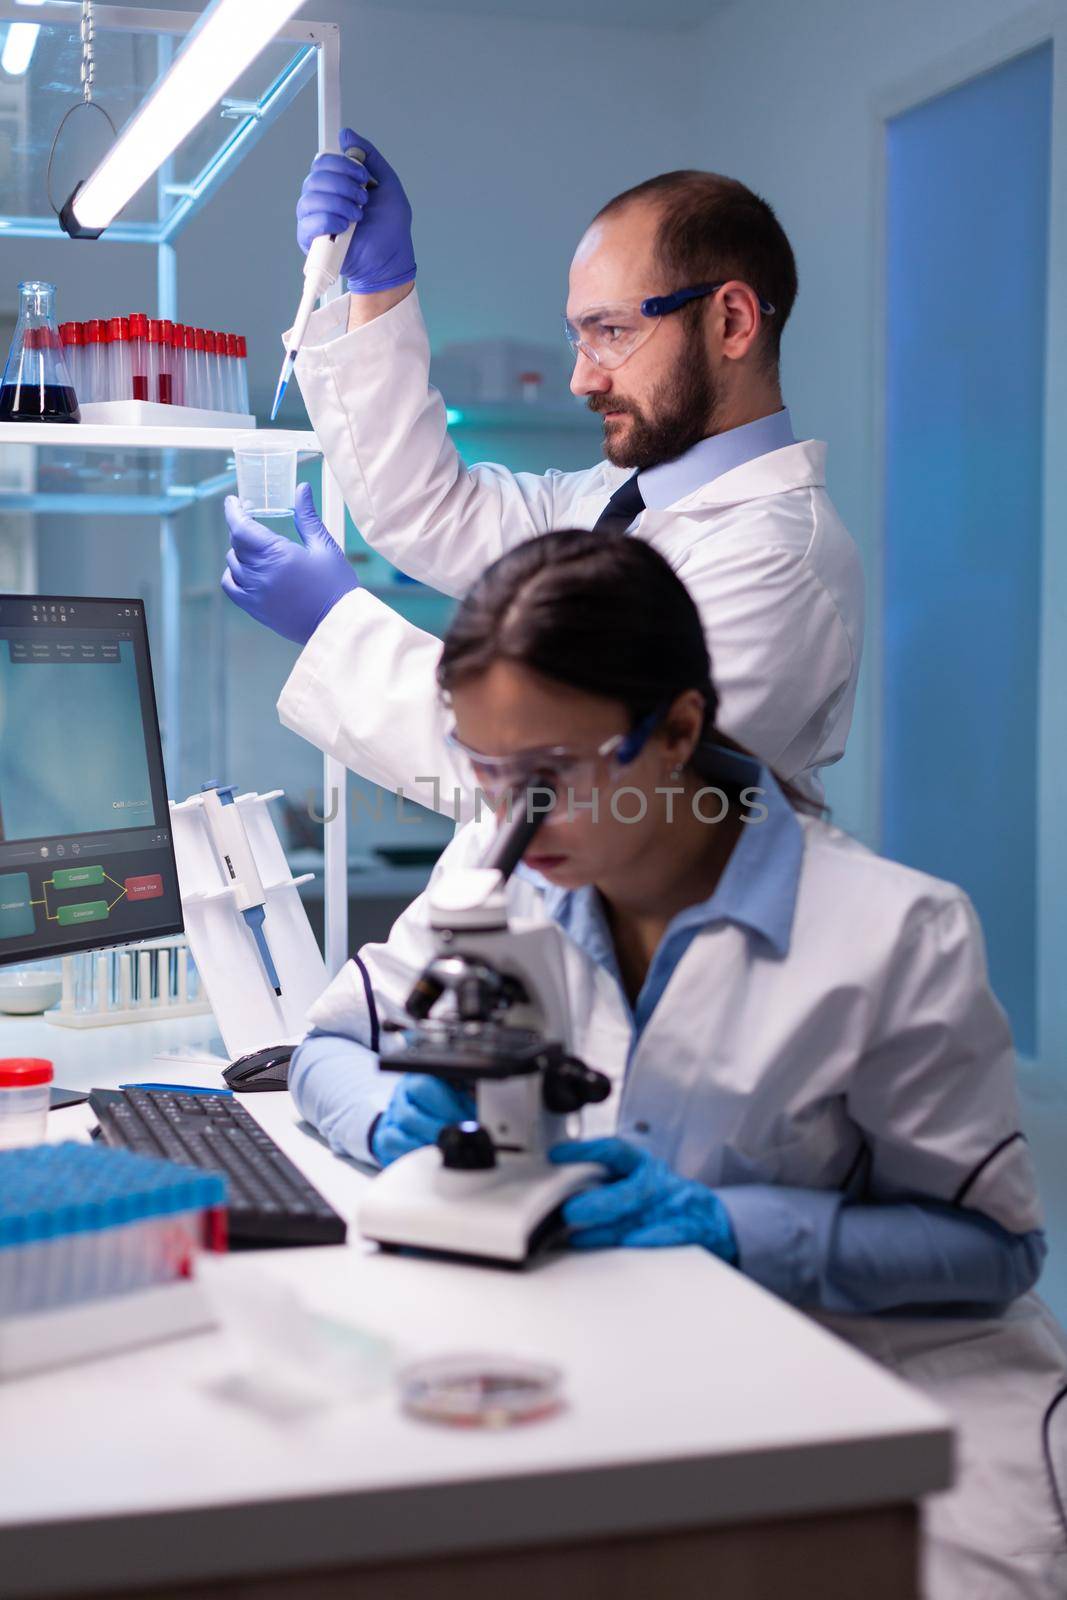 Scientist examining blood sample looking under microscope while chemist doctor using micropipette for pharmaceutical expertise. Team of medical researchers working to discovering cure against disease